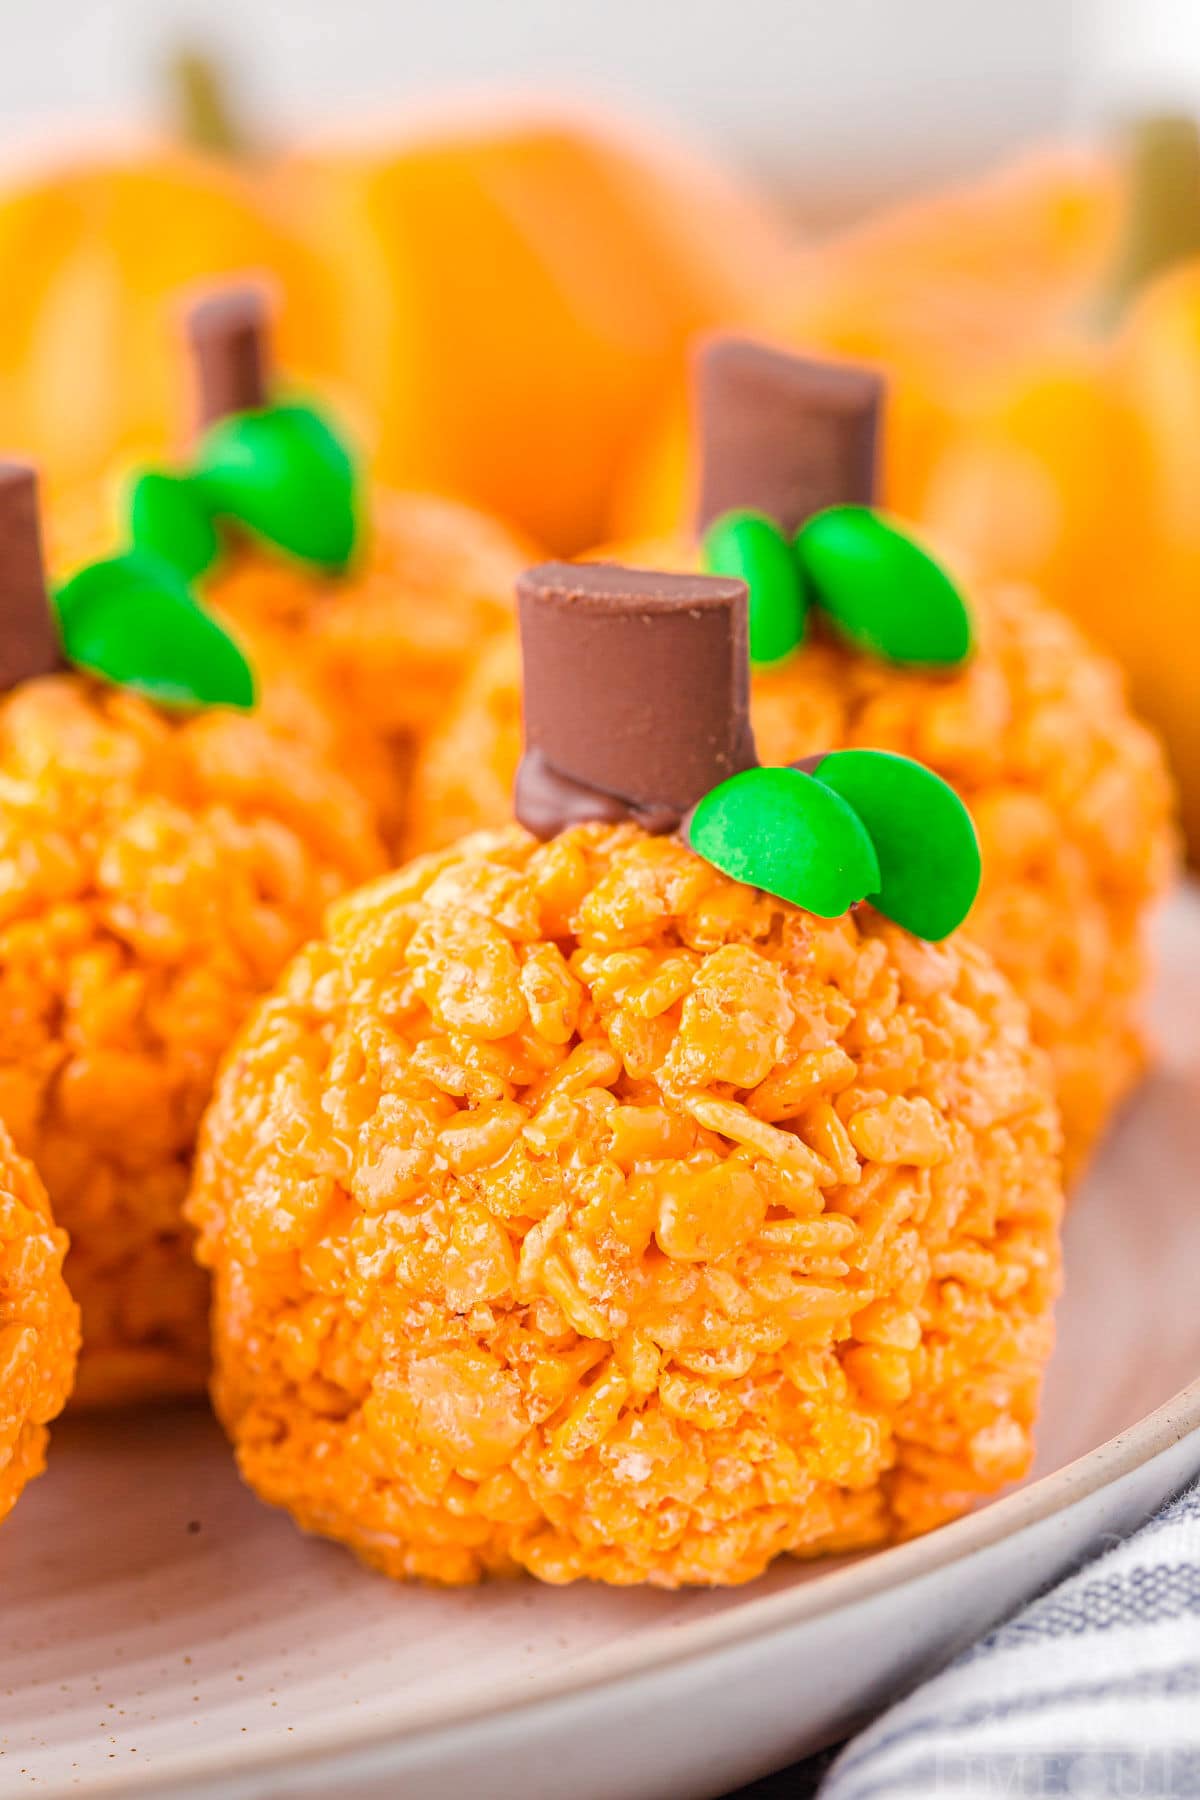 five or six pumpkin shaped rice krispie treats sitting on a round white plate with a striped napkin next to them.